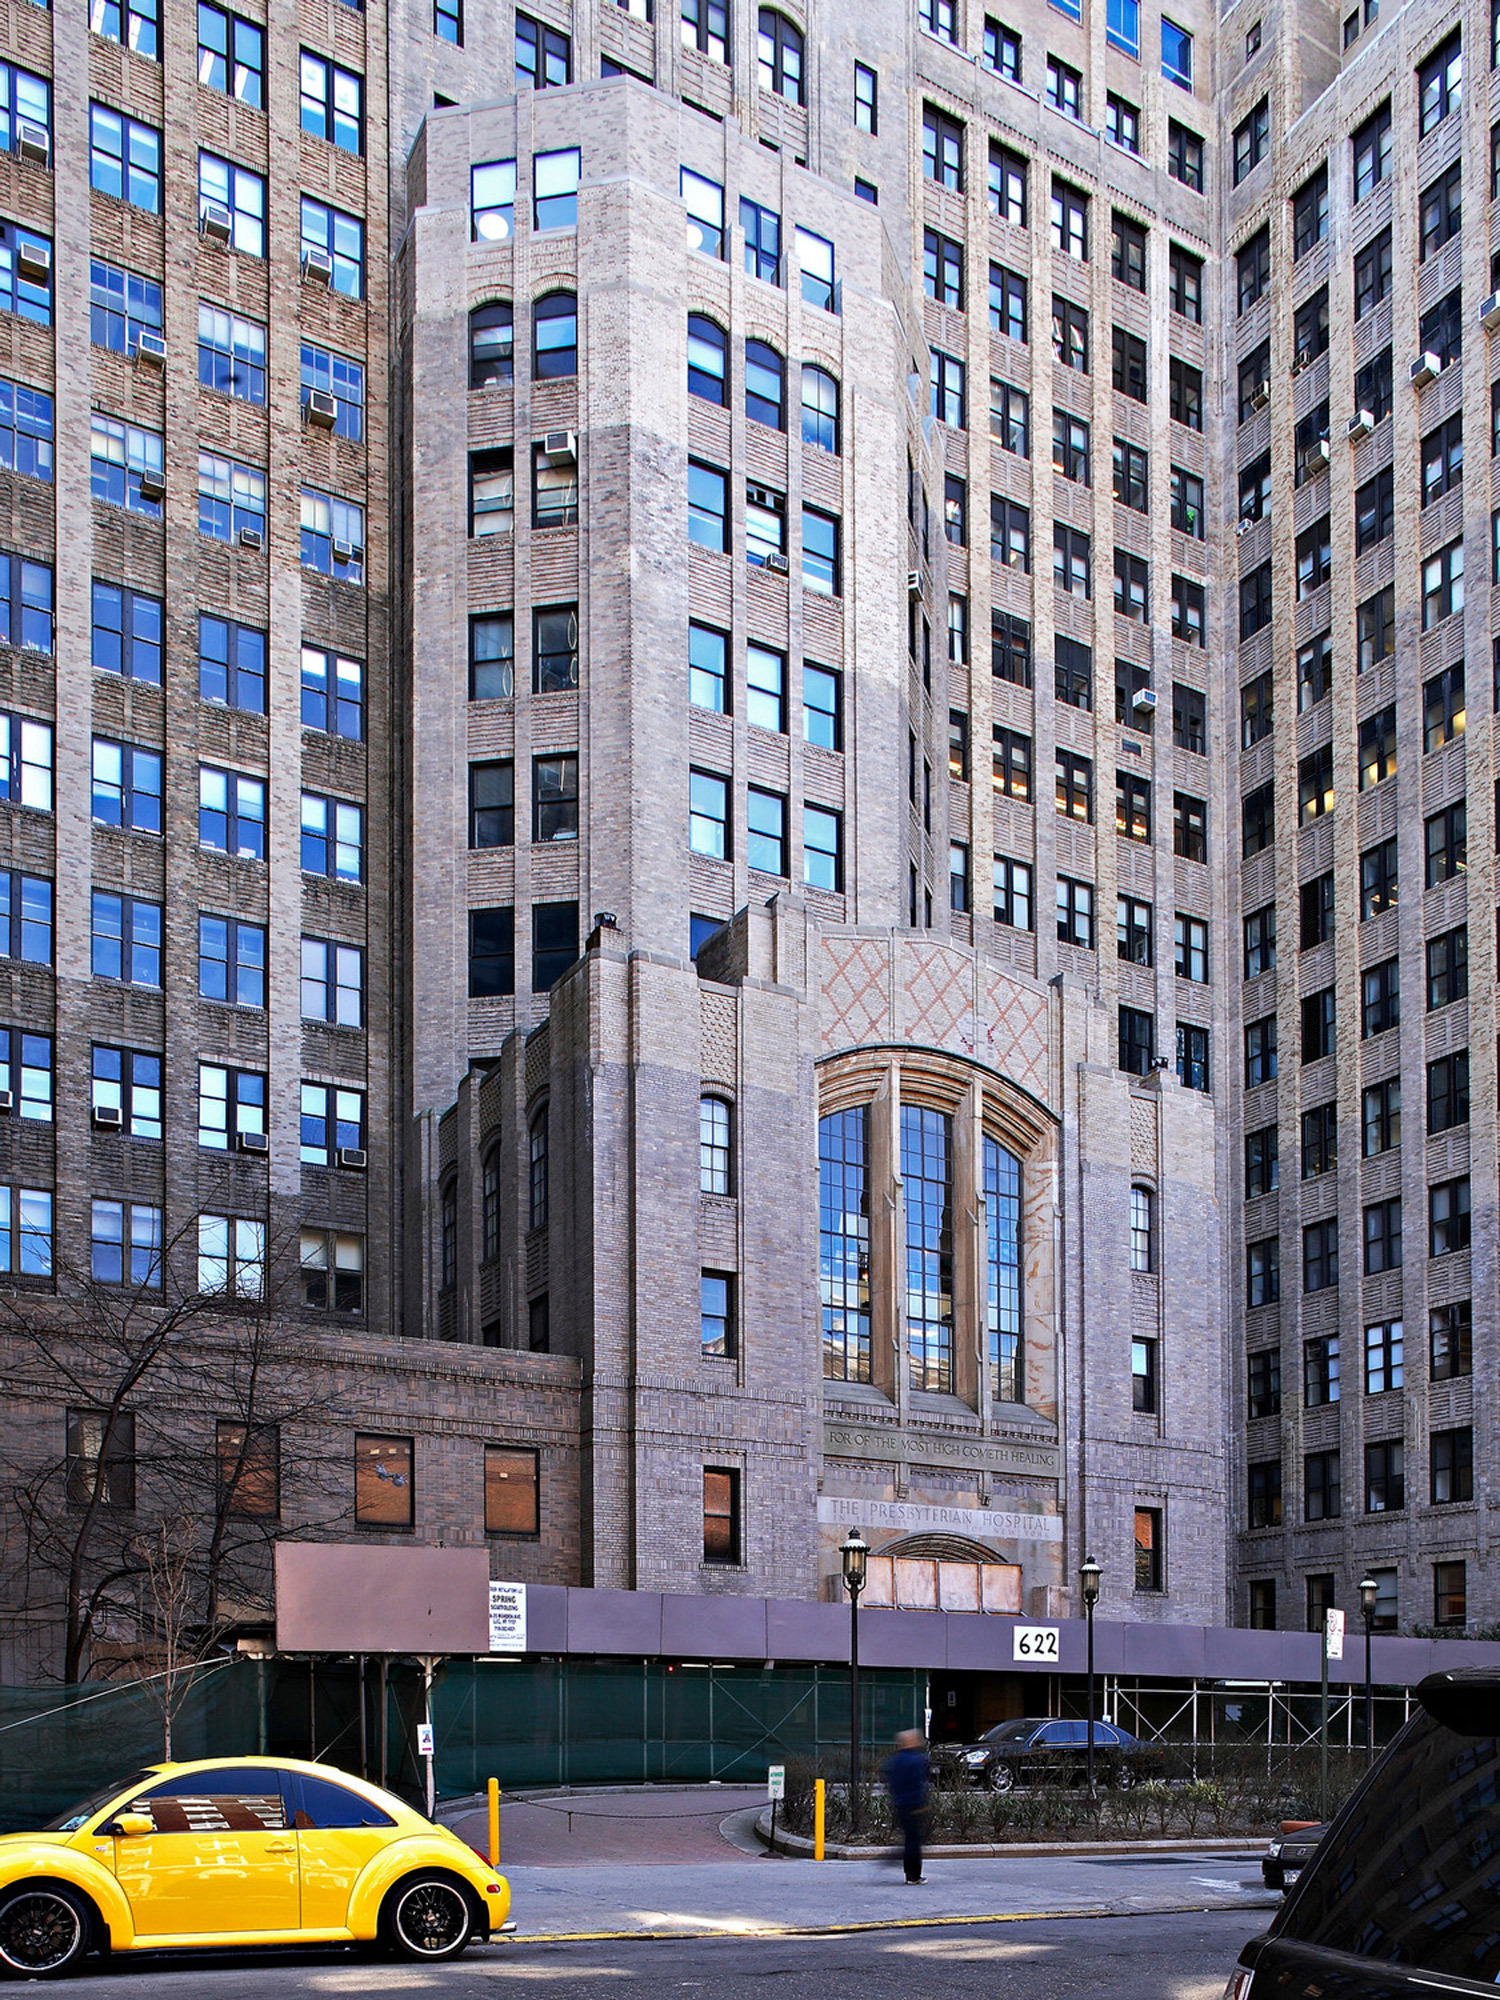 Art Deco skyscraper with vertical lines and geometric accents, emphasizing the 1920s architectural style. The facade showcases intricate stonework and tall windows with ornate detailing around the entryway.